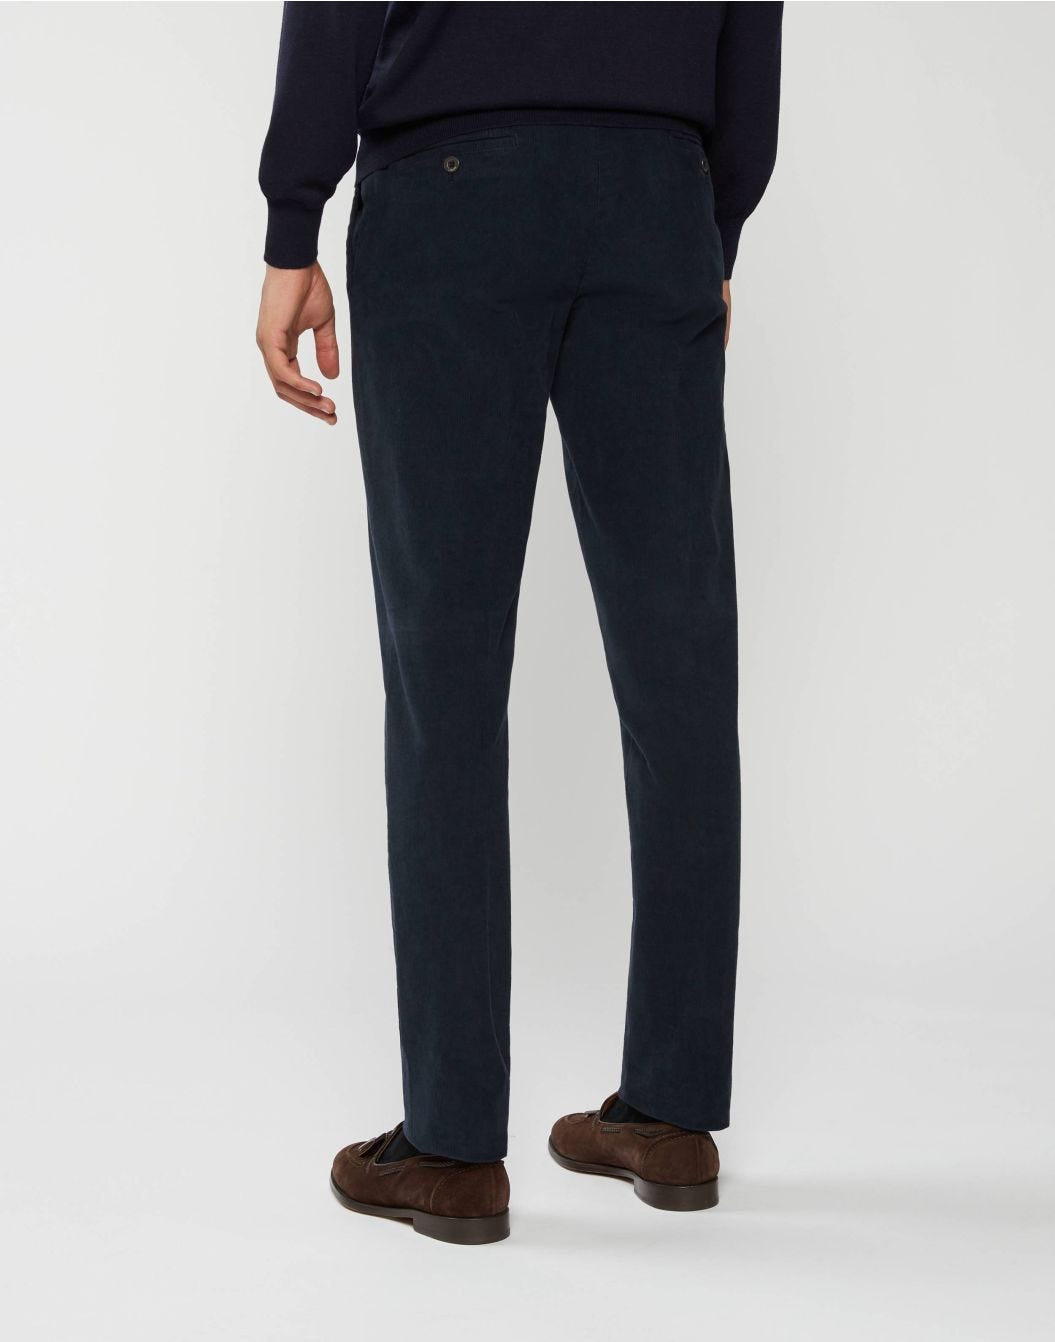 Chino pants in blue corduroy